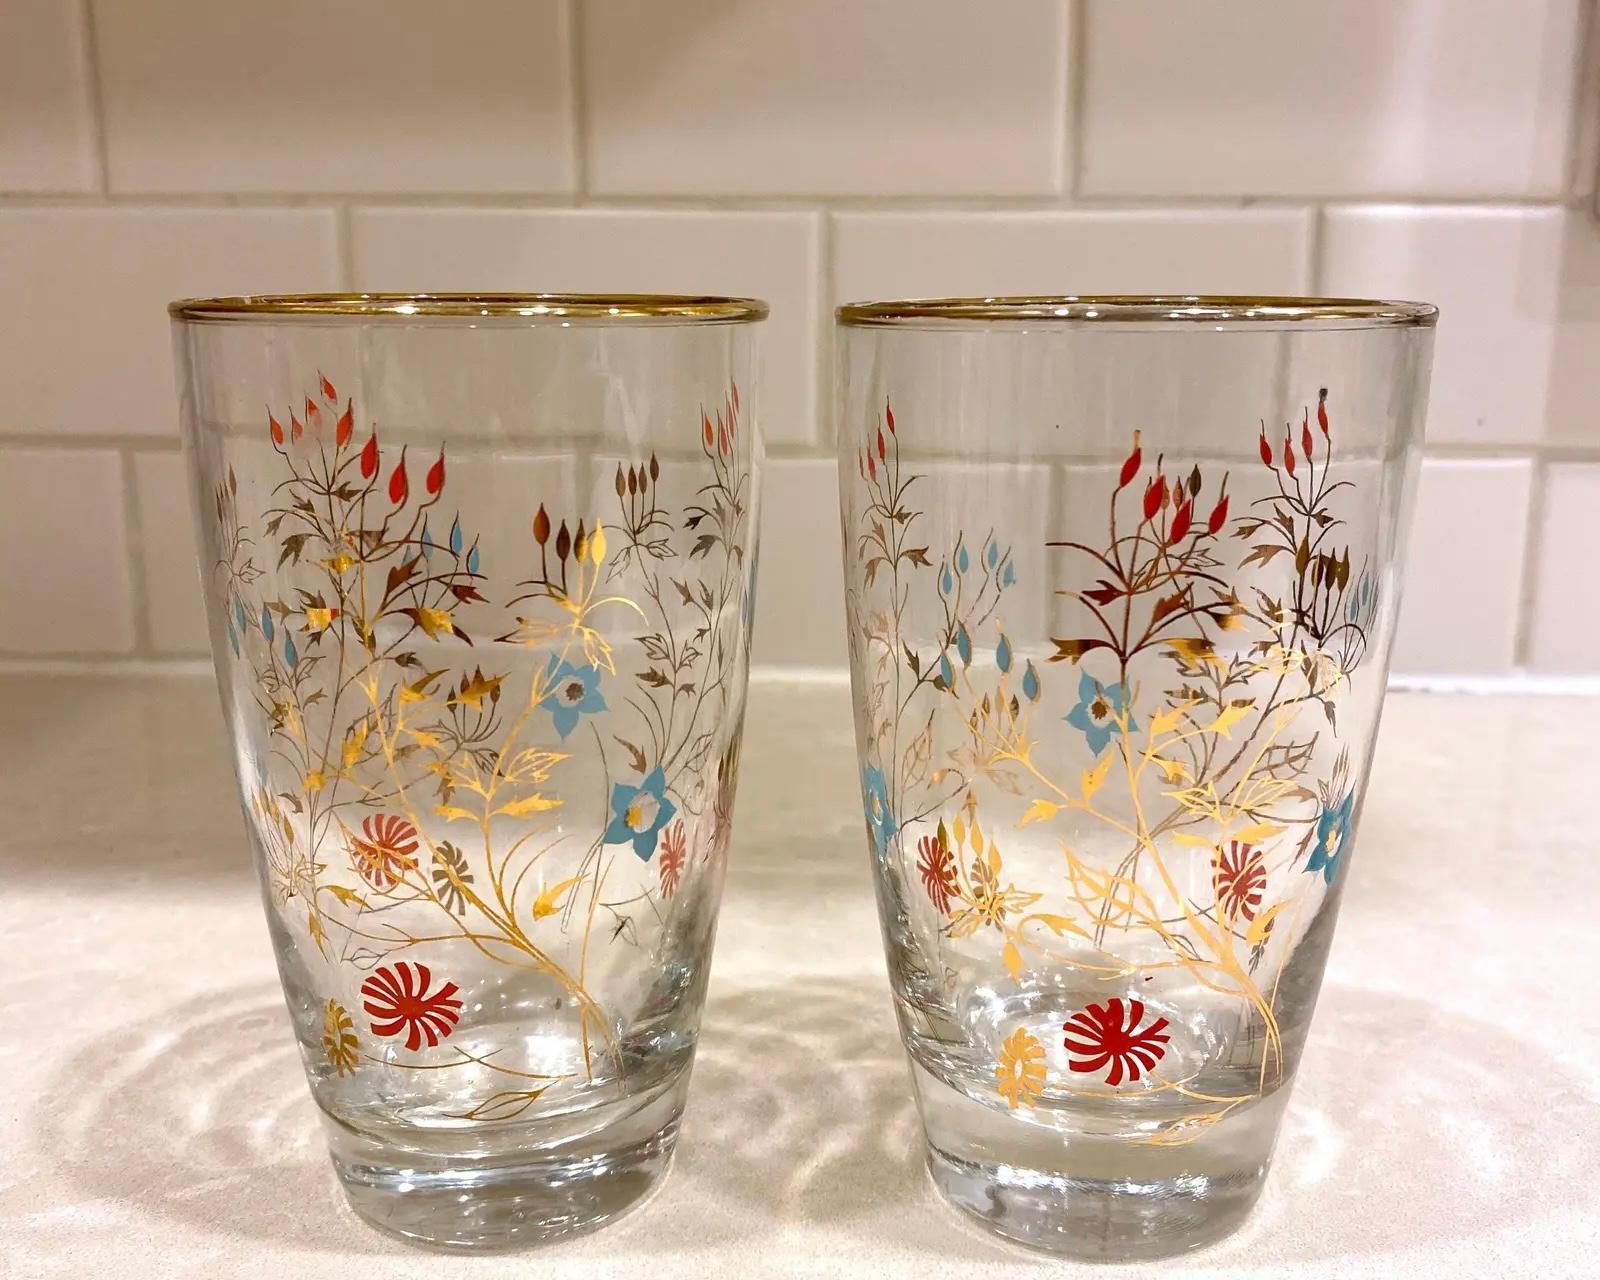 Pink and turquoise floral glasses with gold accents and gold rims. These are my favorite and the last I have in this pattern.